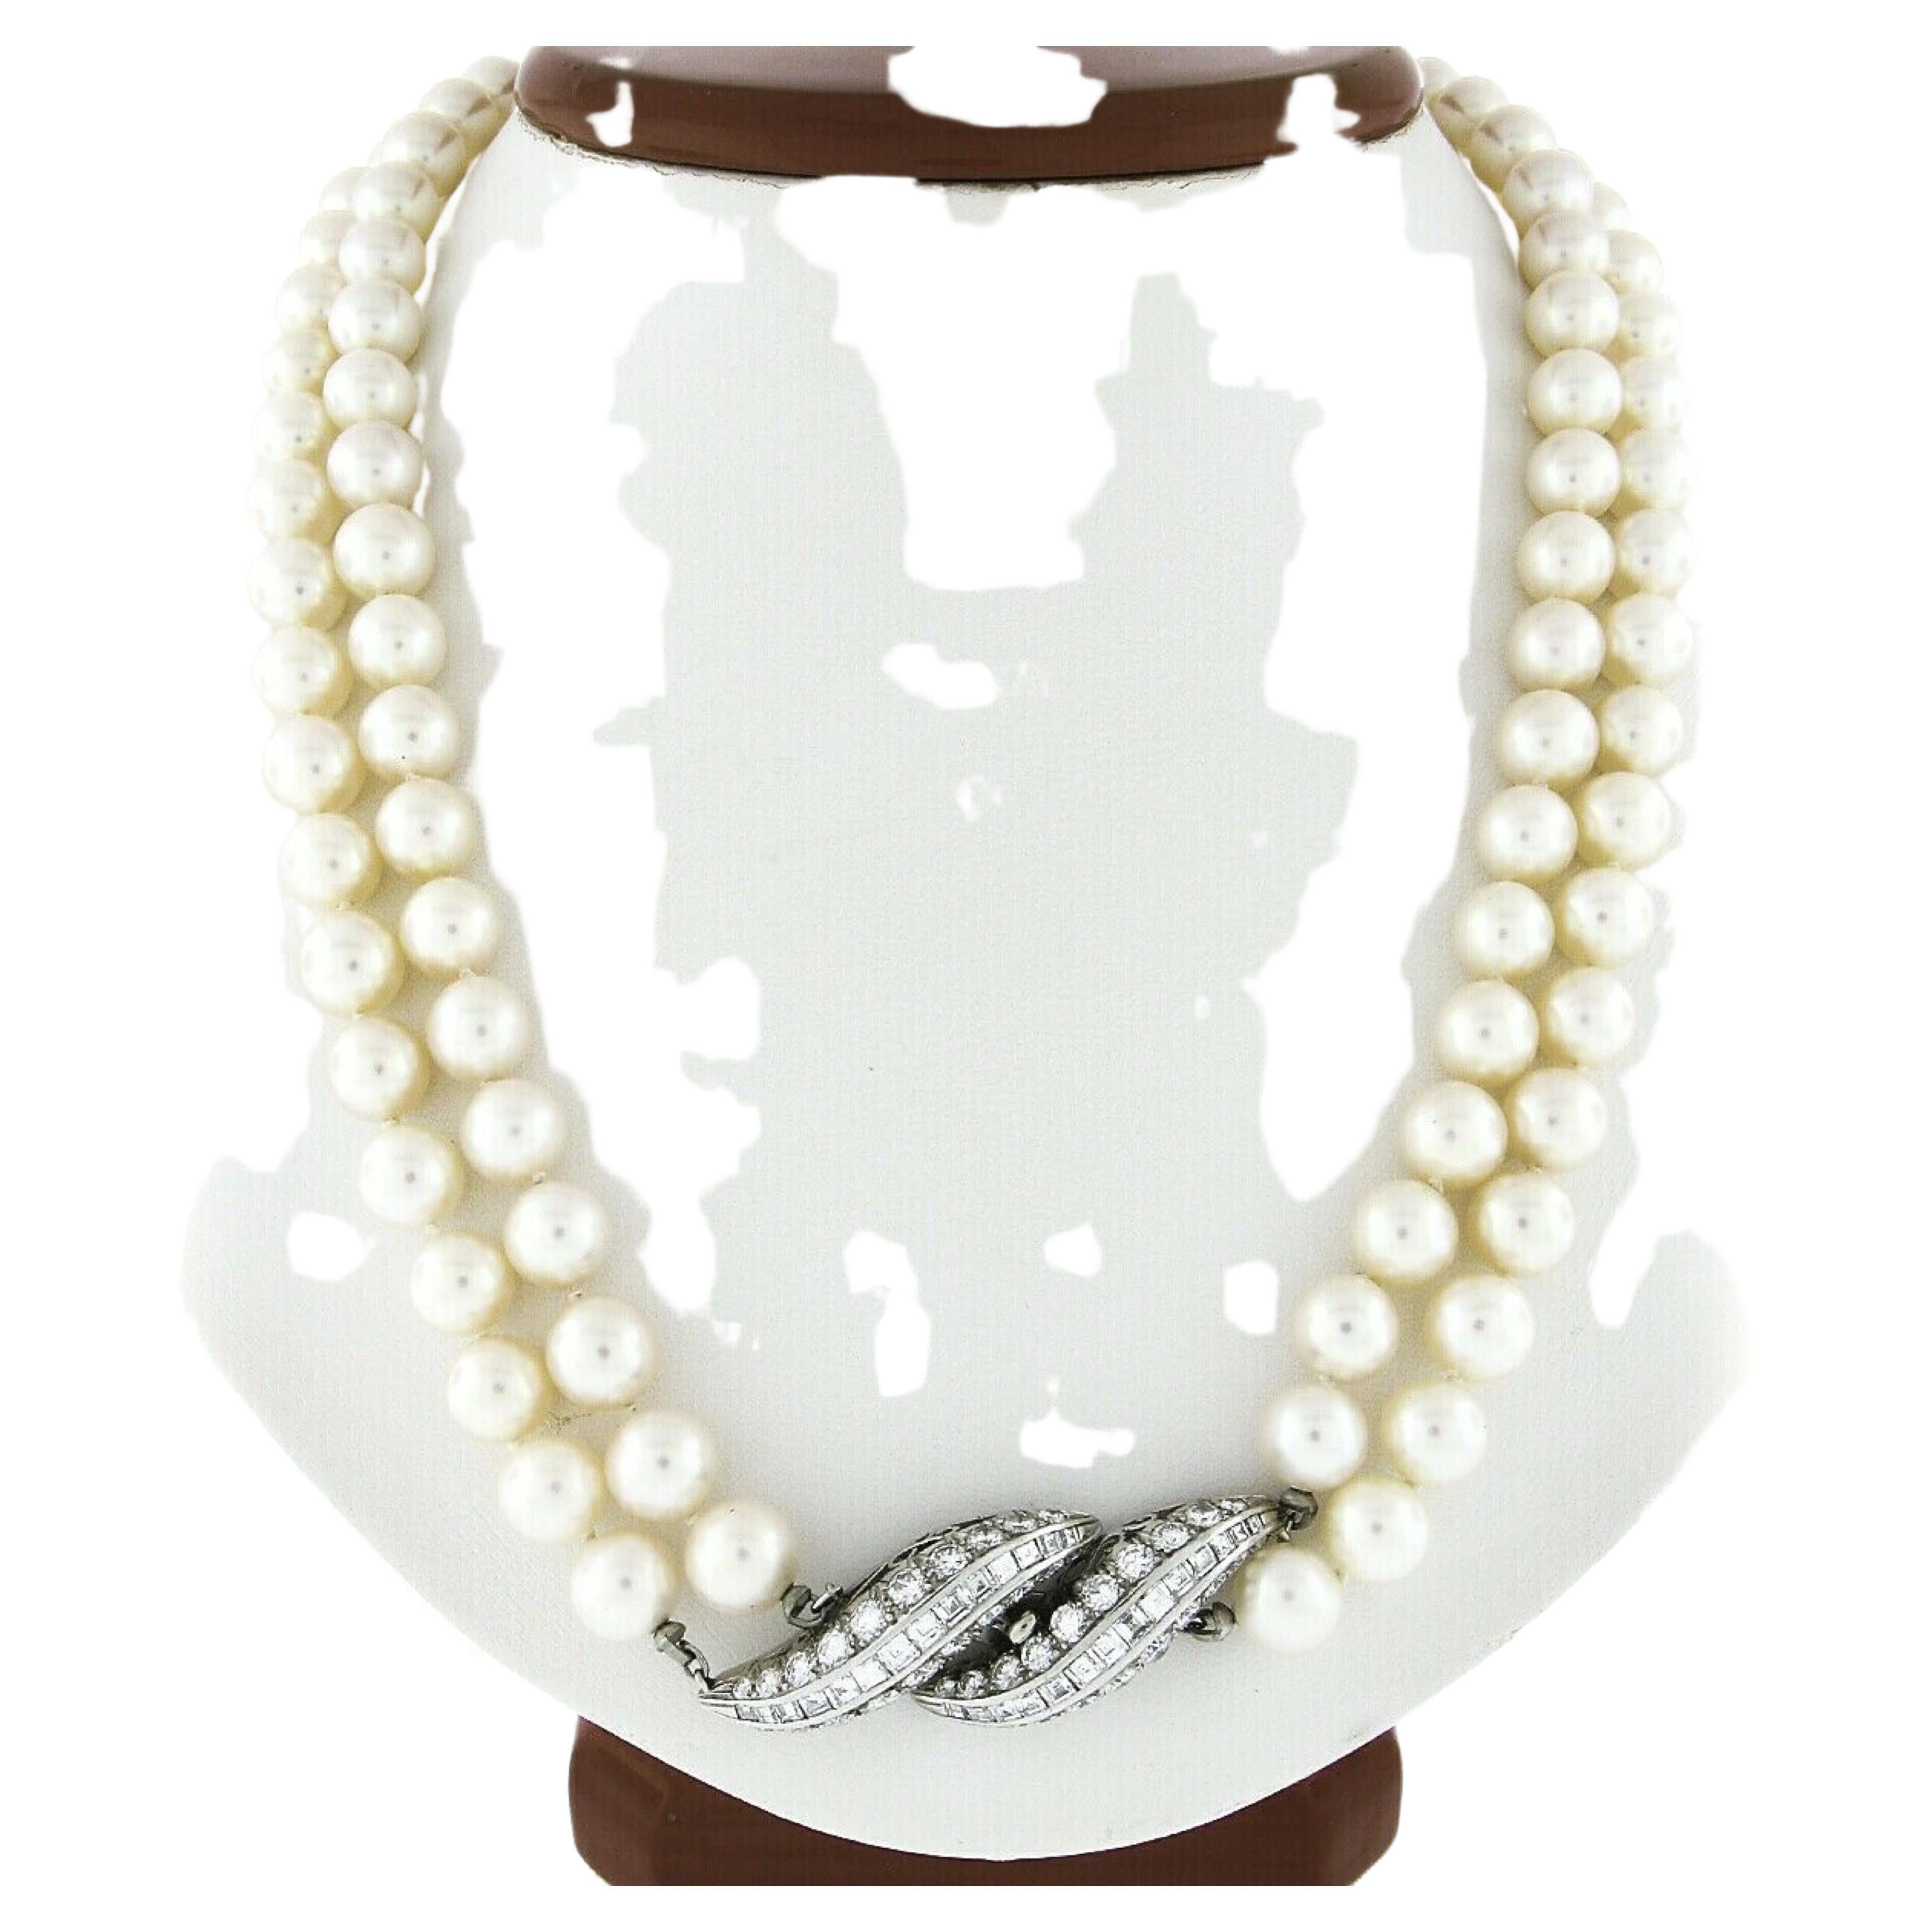 This magnificent vintage dual pearl strand statement necklace is strung with 132 GIA certified cultured Akoya pearls that are near-round in shape. These beautiful pearls are well matched in size and certified as ranging from 7.93mm to 8.44mm each,